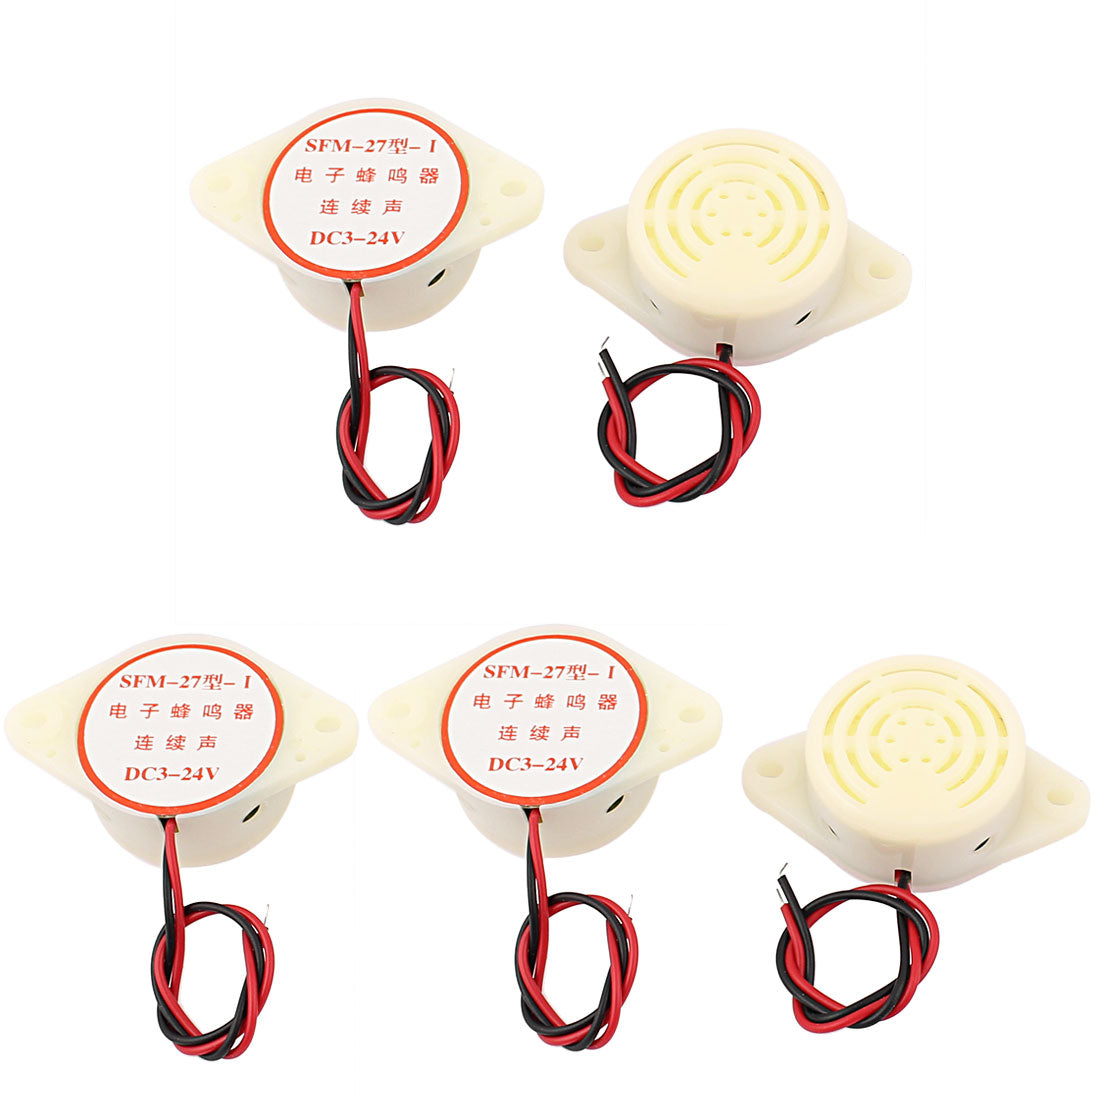 uxcell Uxcell DC3-24V 2 Wire Industrial Electronic Alarm Sound Buzzer 95dB 5pcs